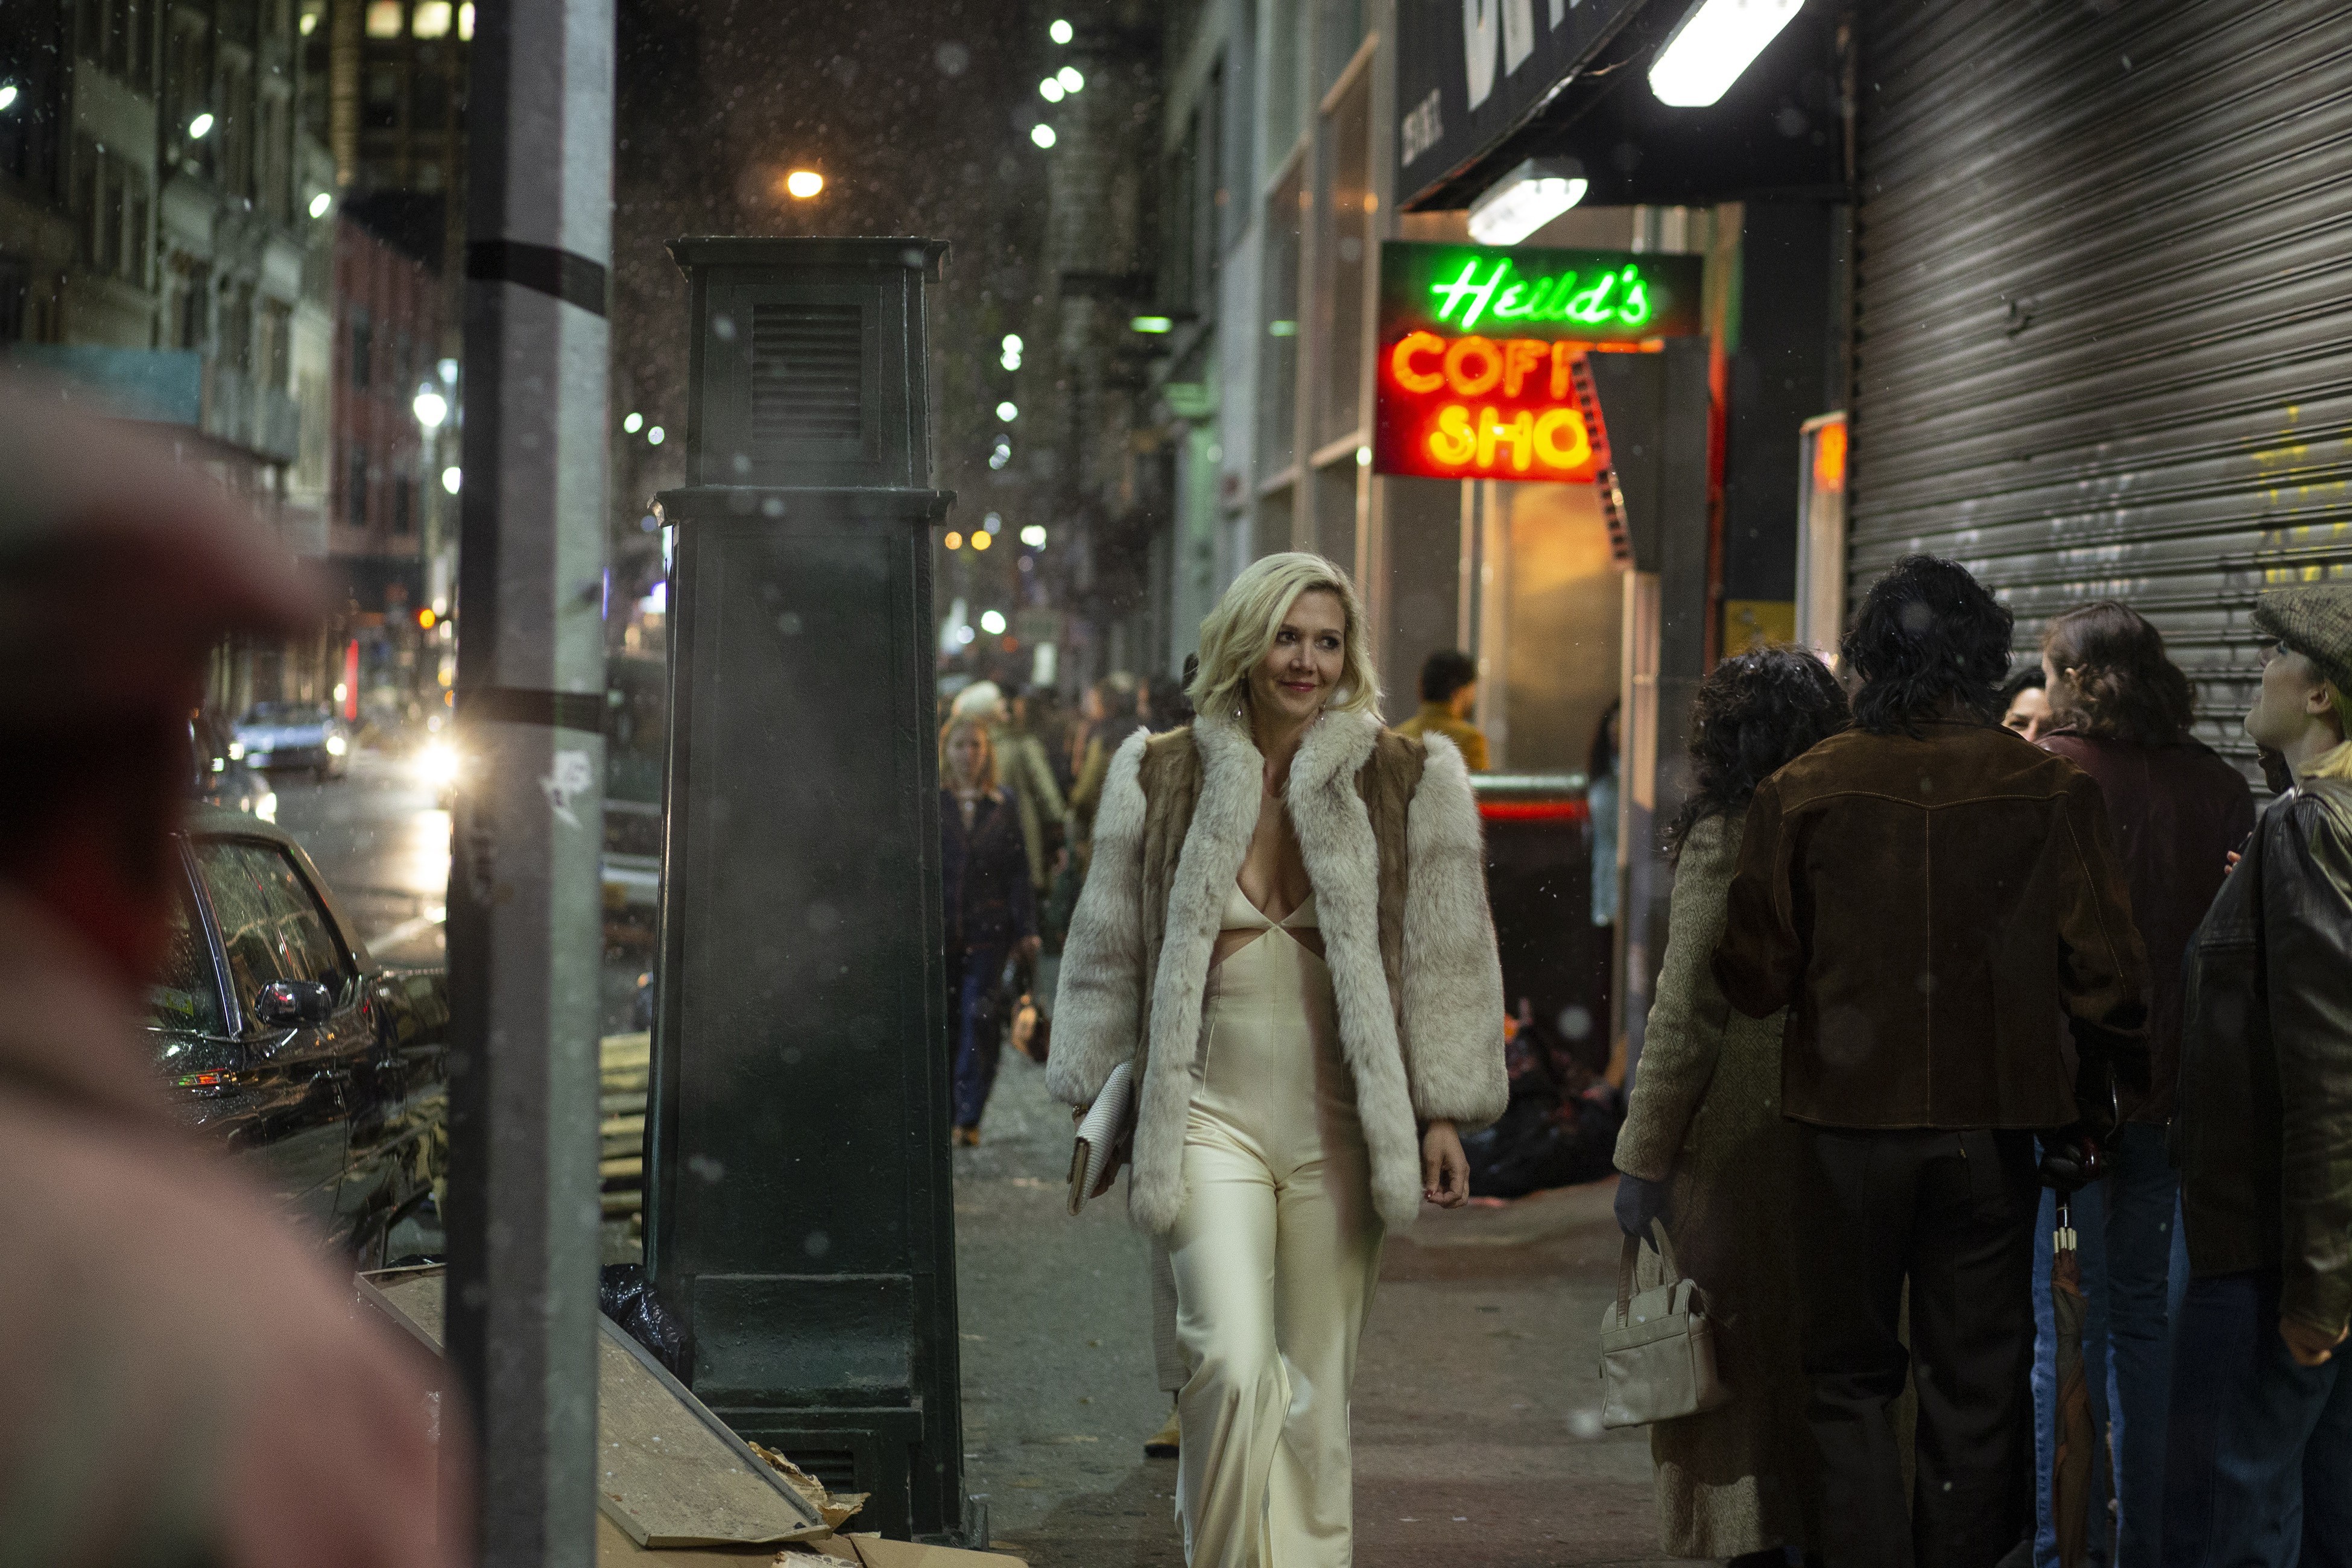 Foxy Di Pornography - HBO's The Deuce Plays Dirty in Seedy New York for Season 2 | Miami New Times